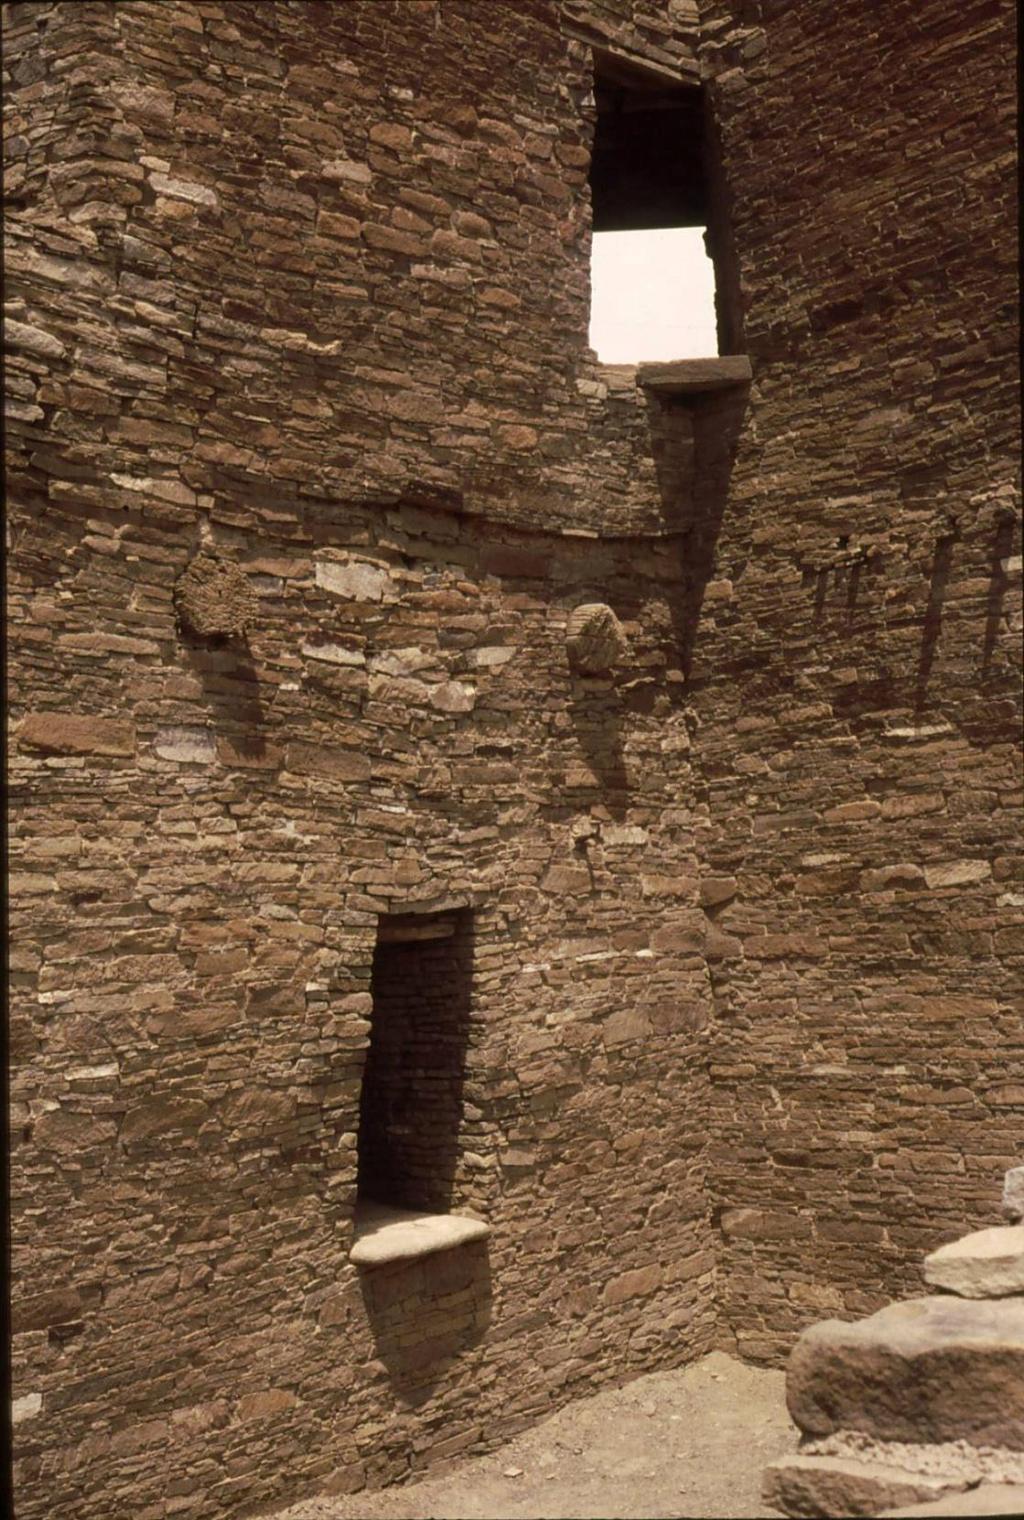 Around 500 AD they moved to above ground homes called unit houses. These homes were two and three stories high. The underground Kivas became religious places.